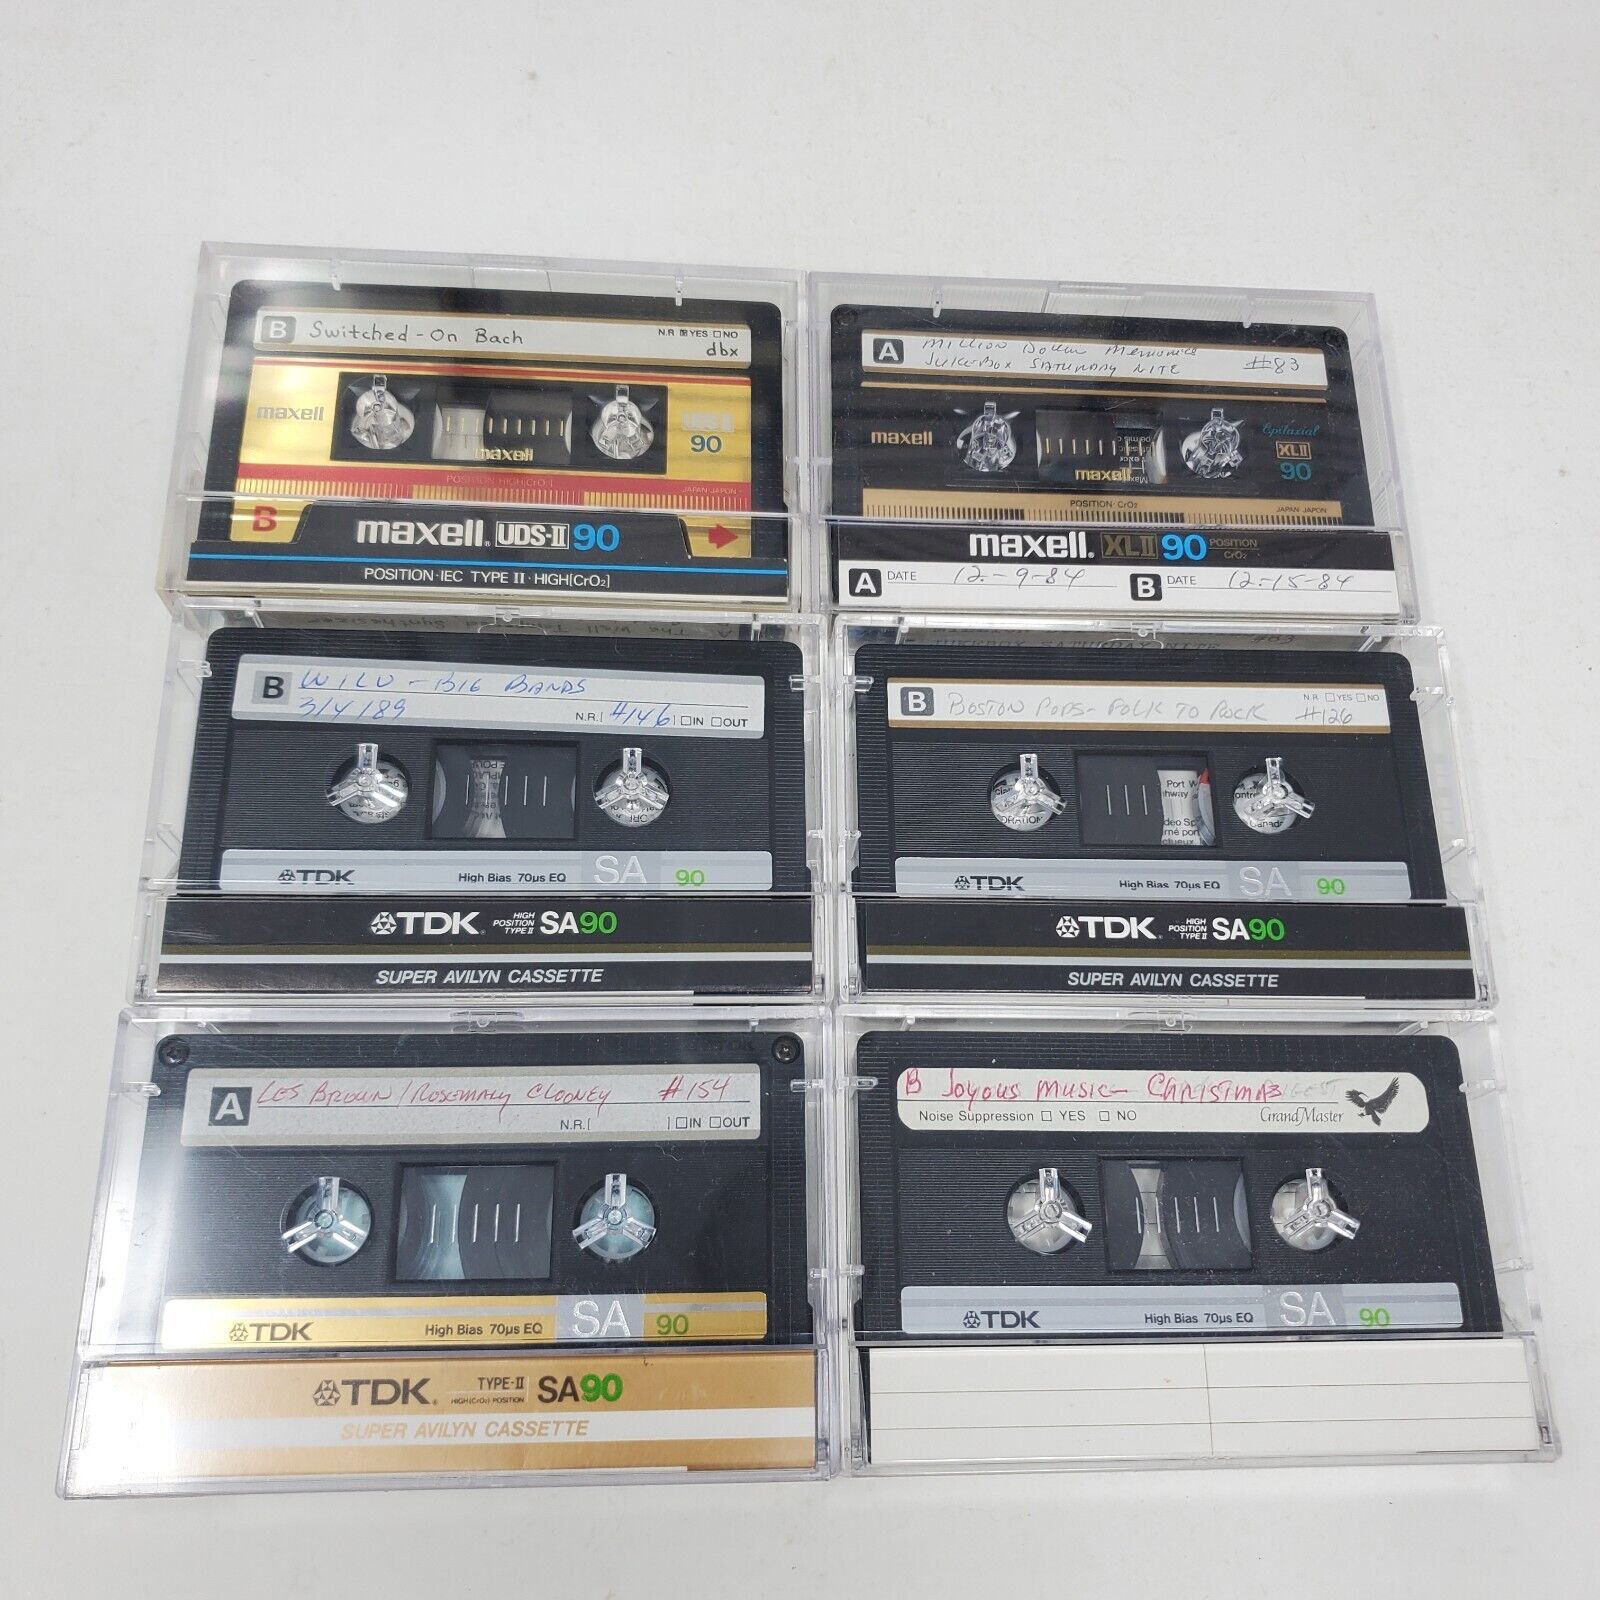 Cassette Lot of 100 with Cases (Recorded On, Maxell XL II, C90, TDK, Sony, Used) Без бренда - фотография #4